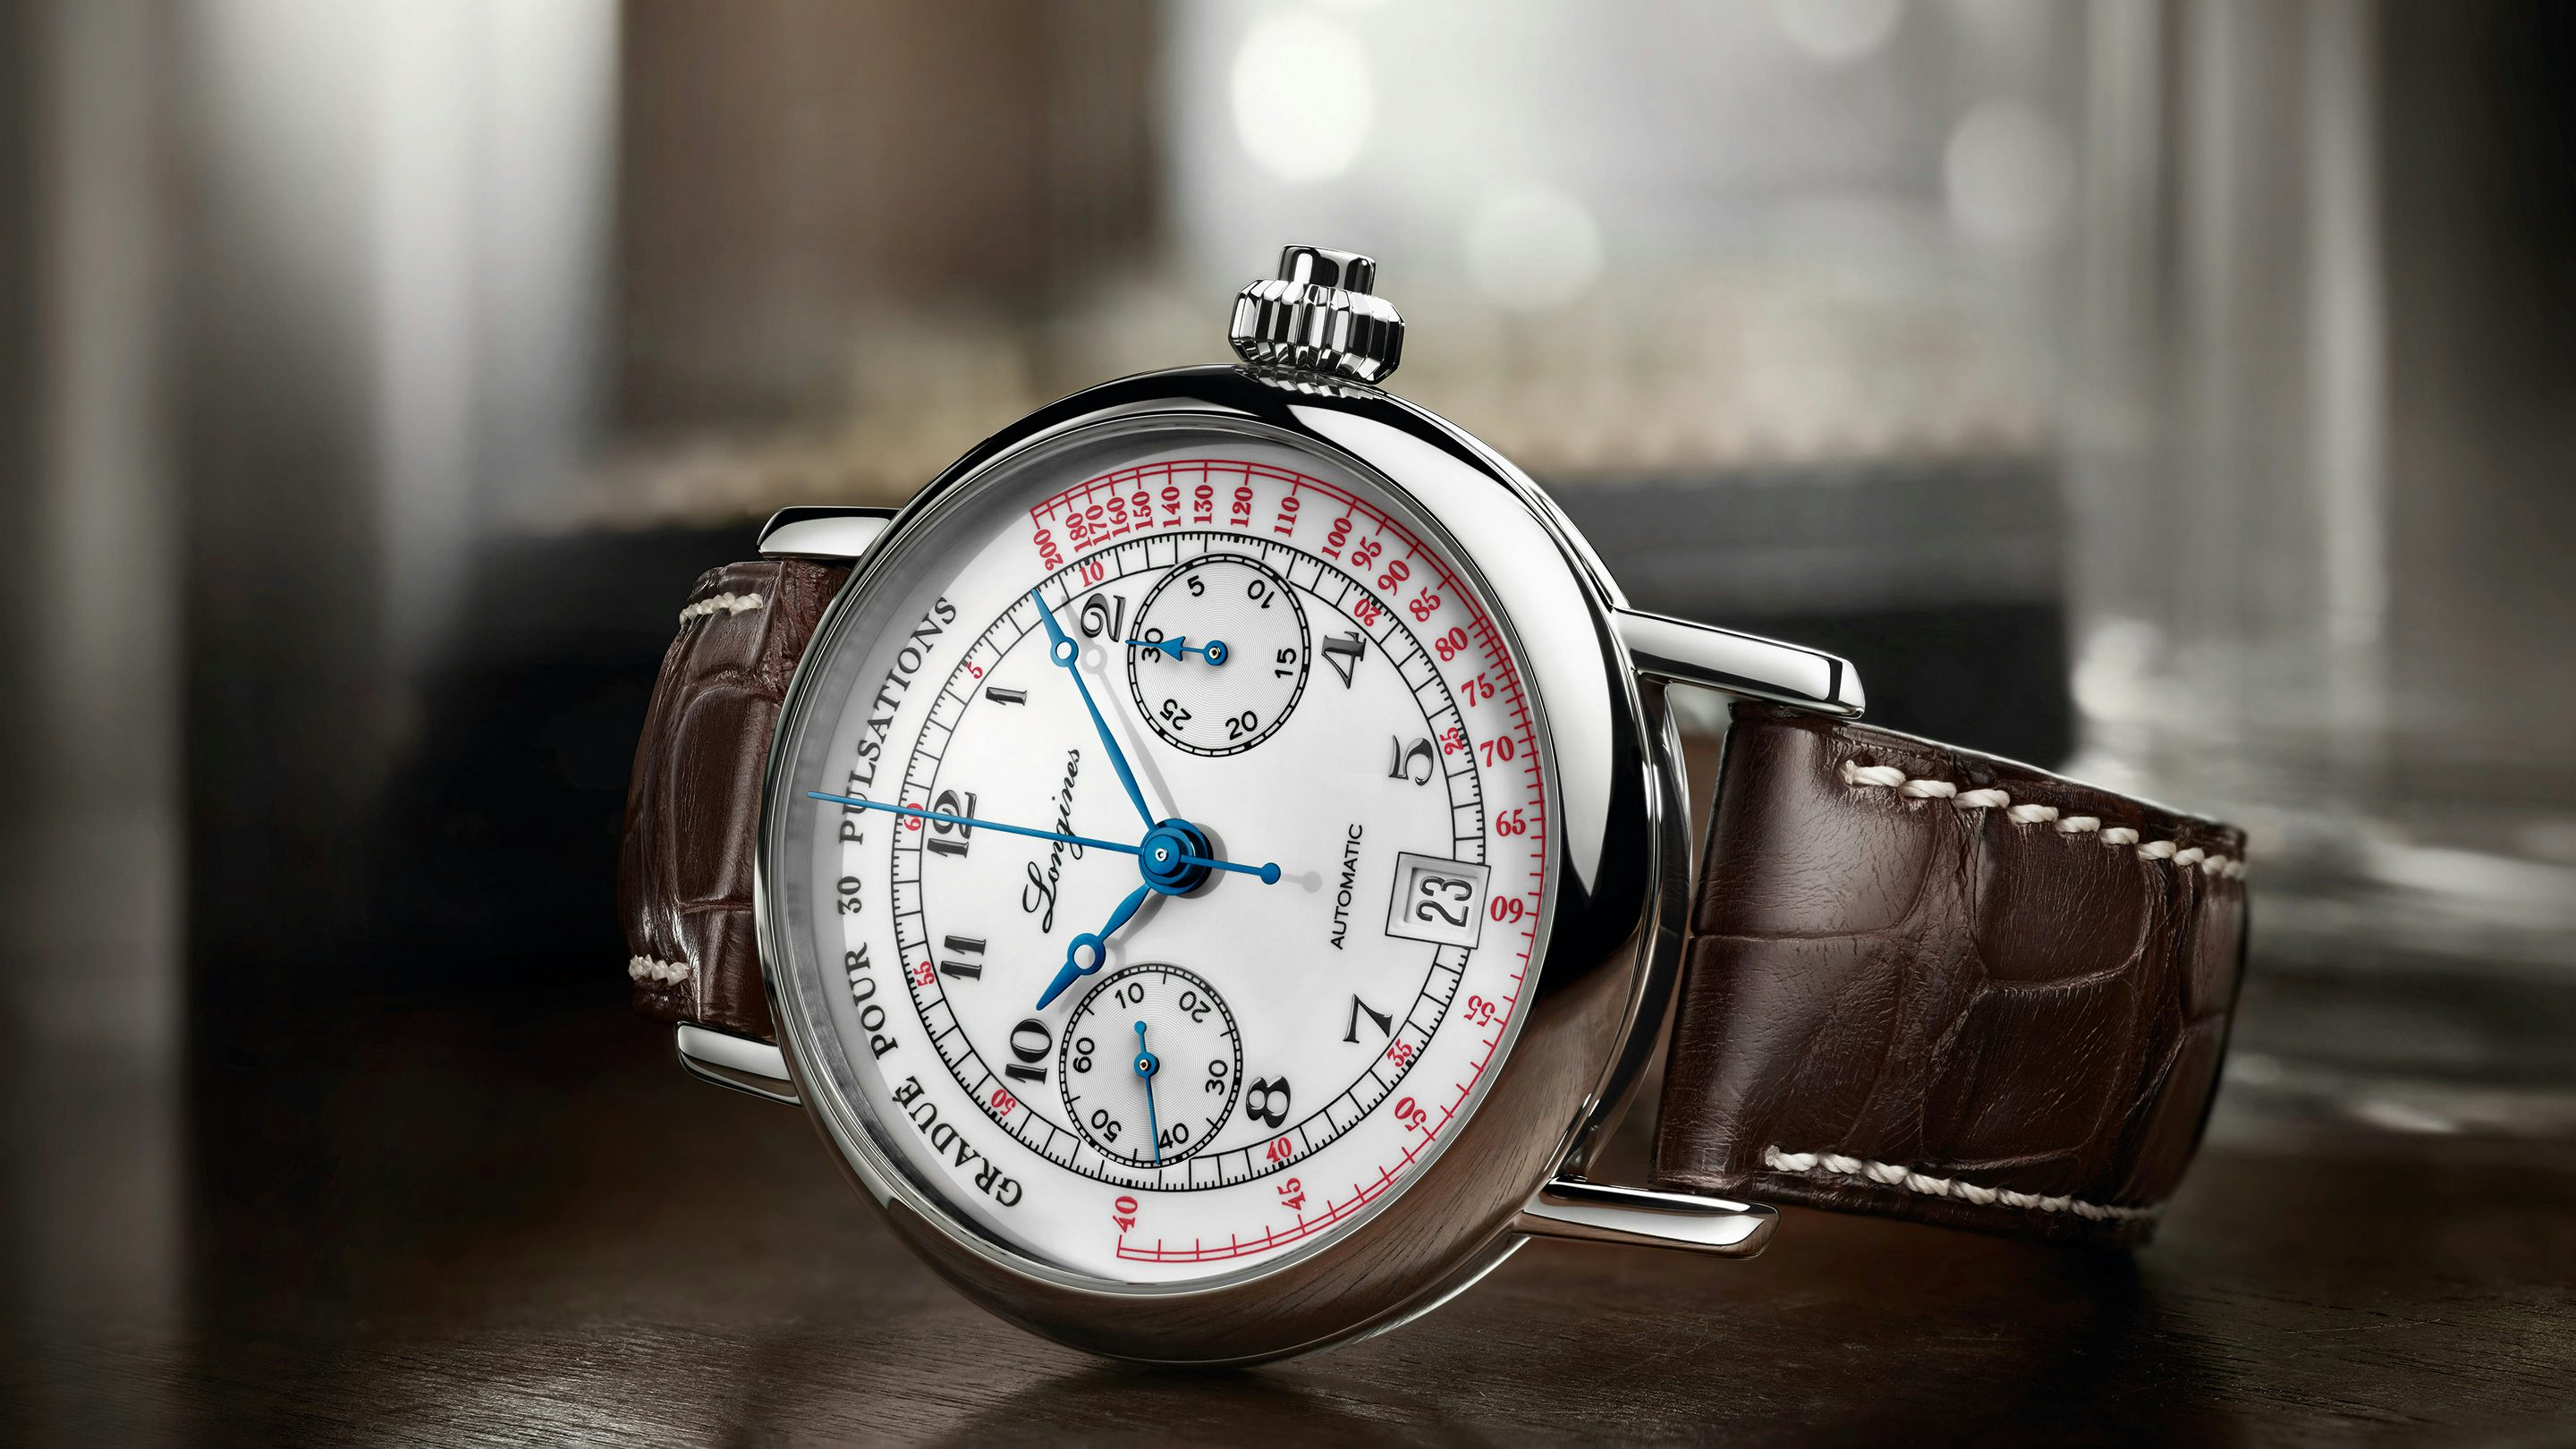 The Longines Pulsometer Chronograph, With White Lacquer Dial - Hodinkee